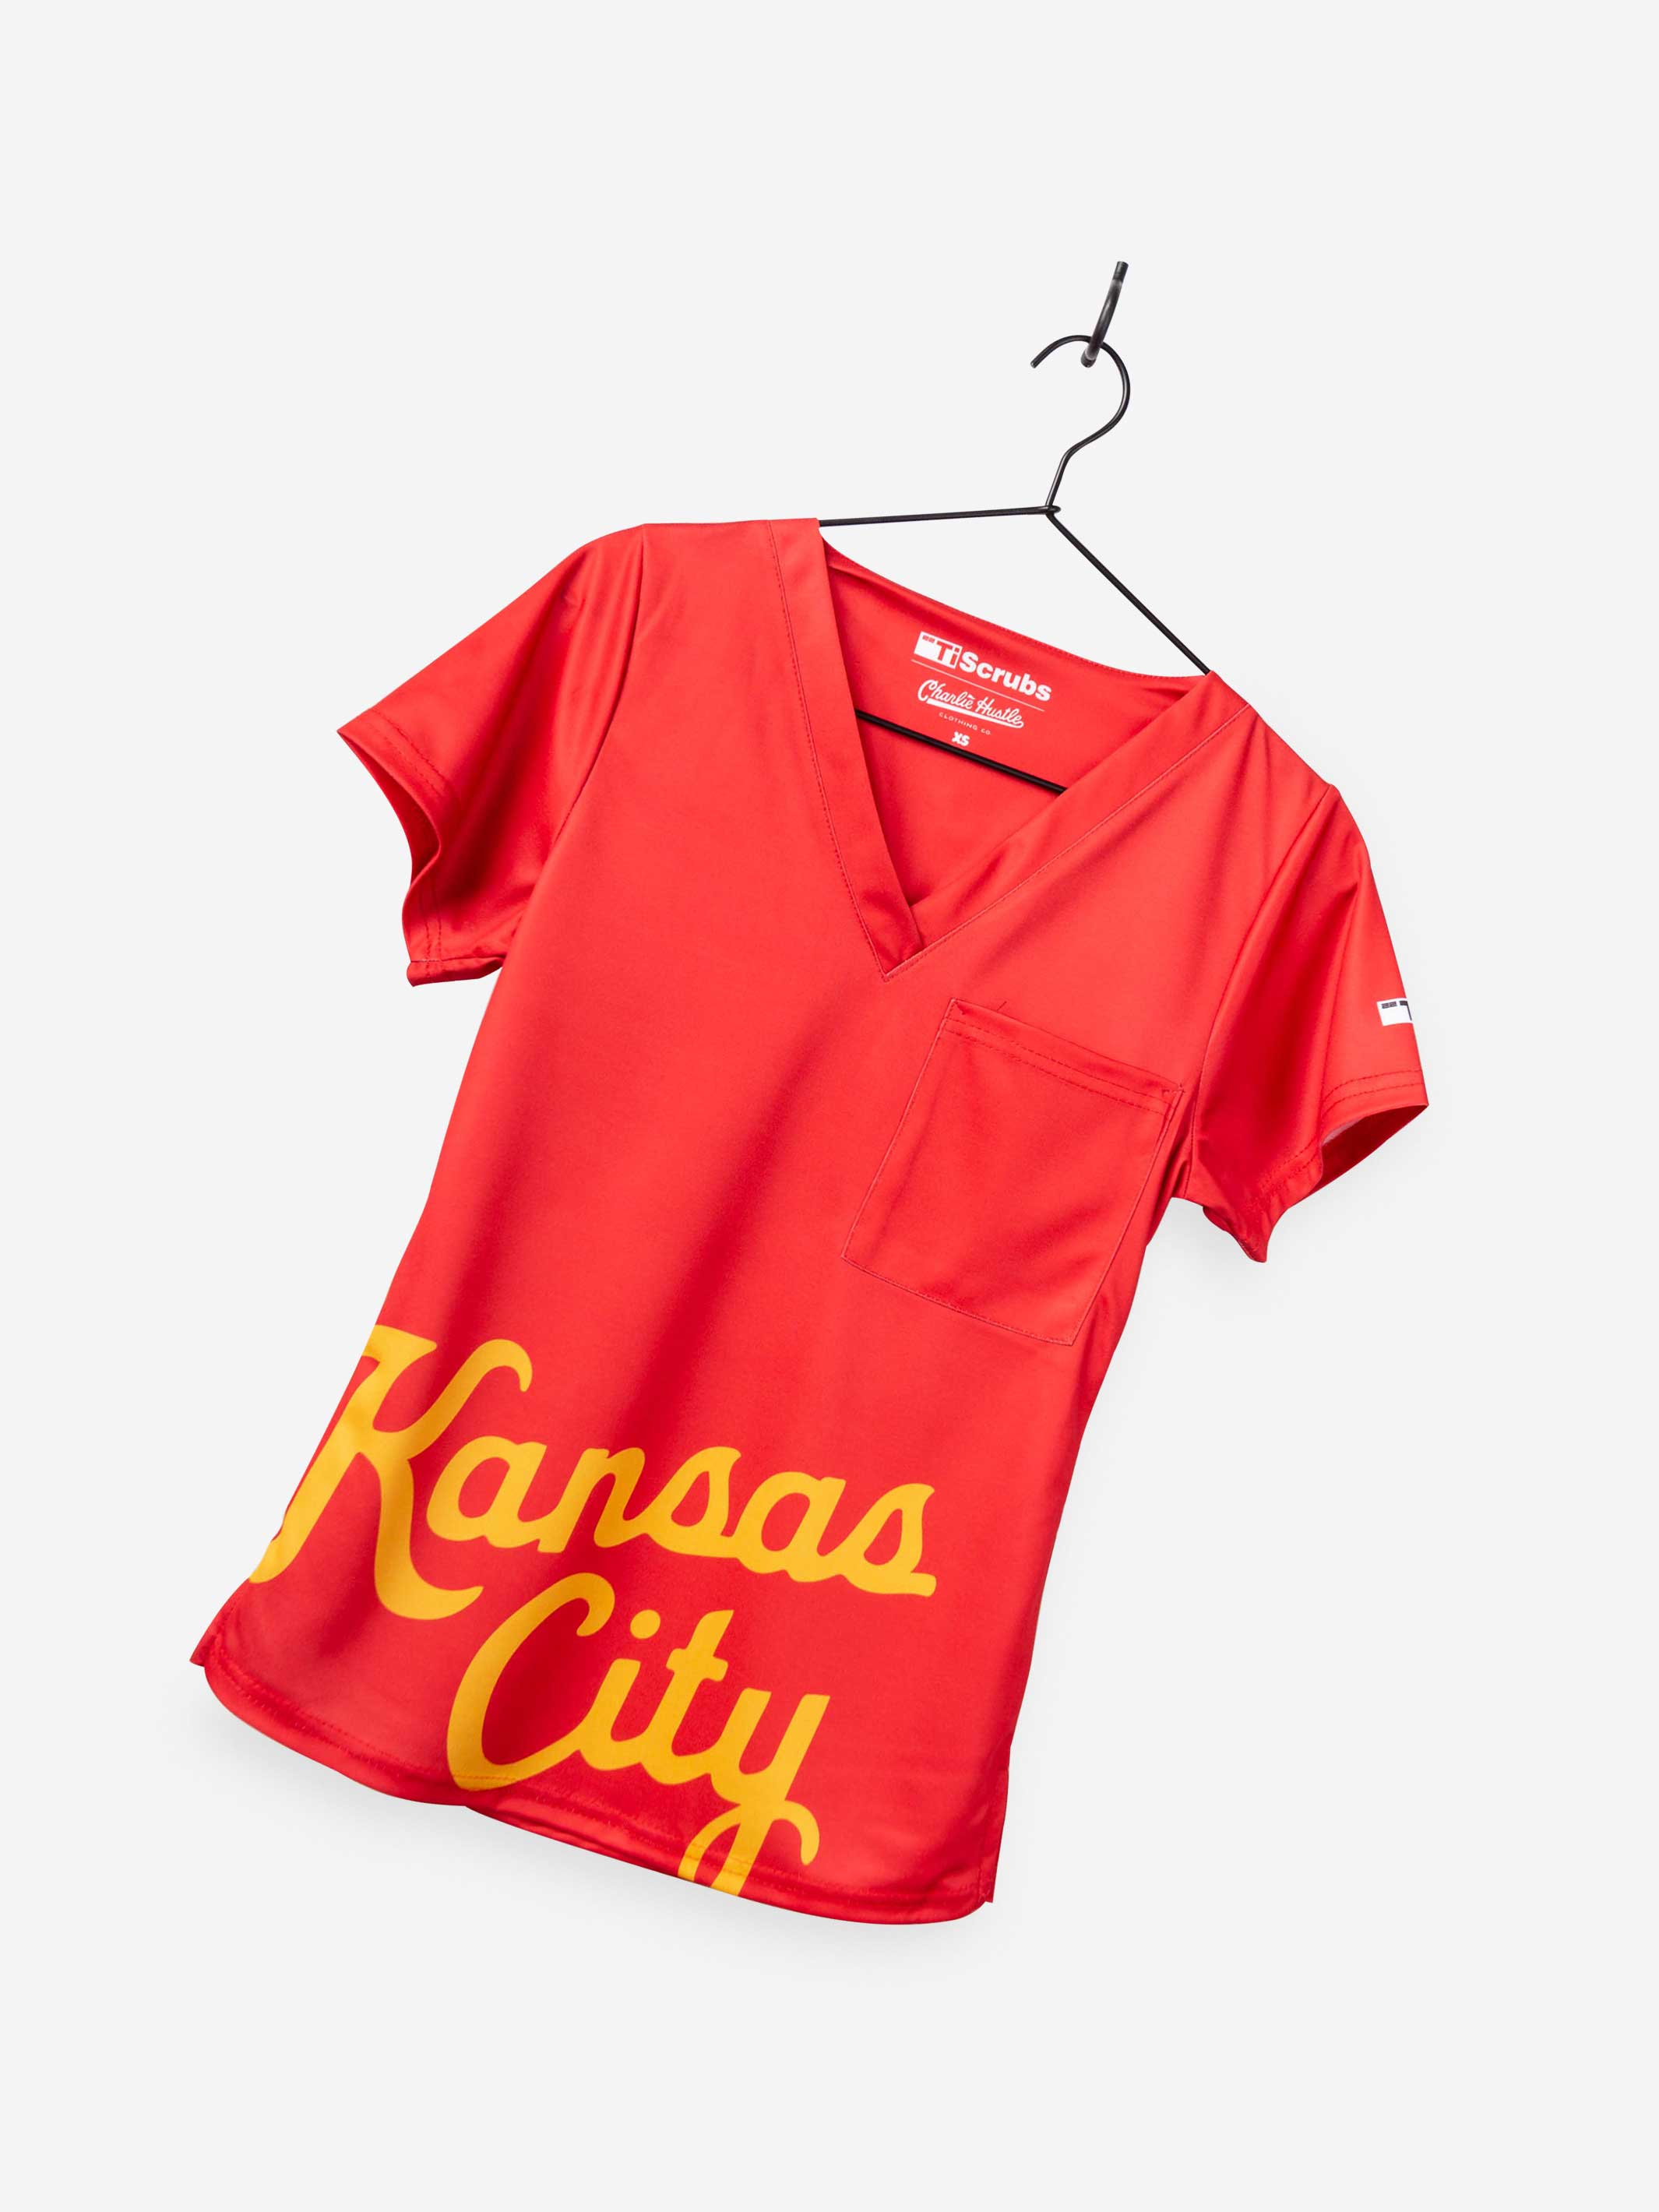 Women&#39;s Charlie Hustle Scrub Top with Kansas City Script in Red and Gold with V-neck